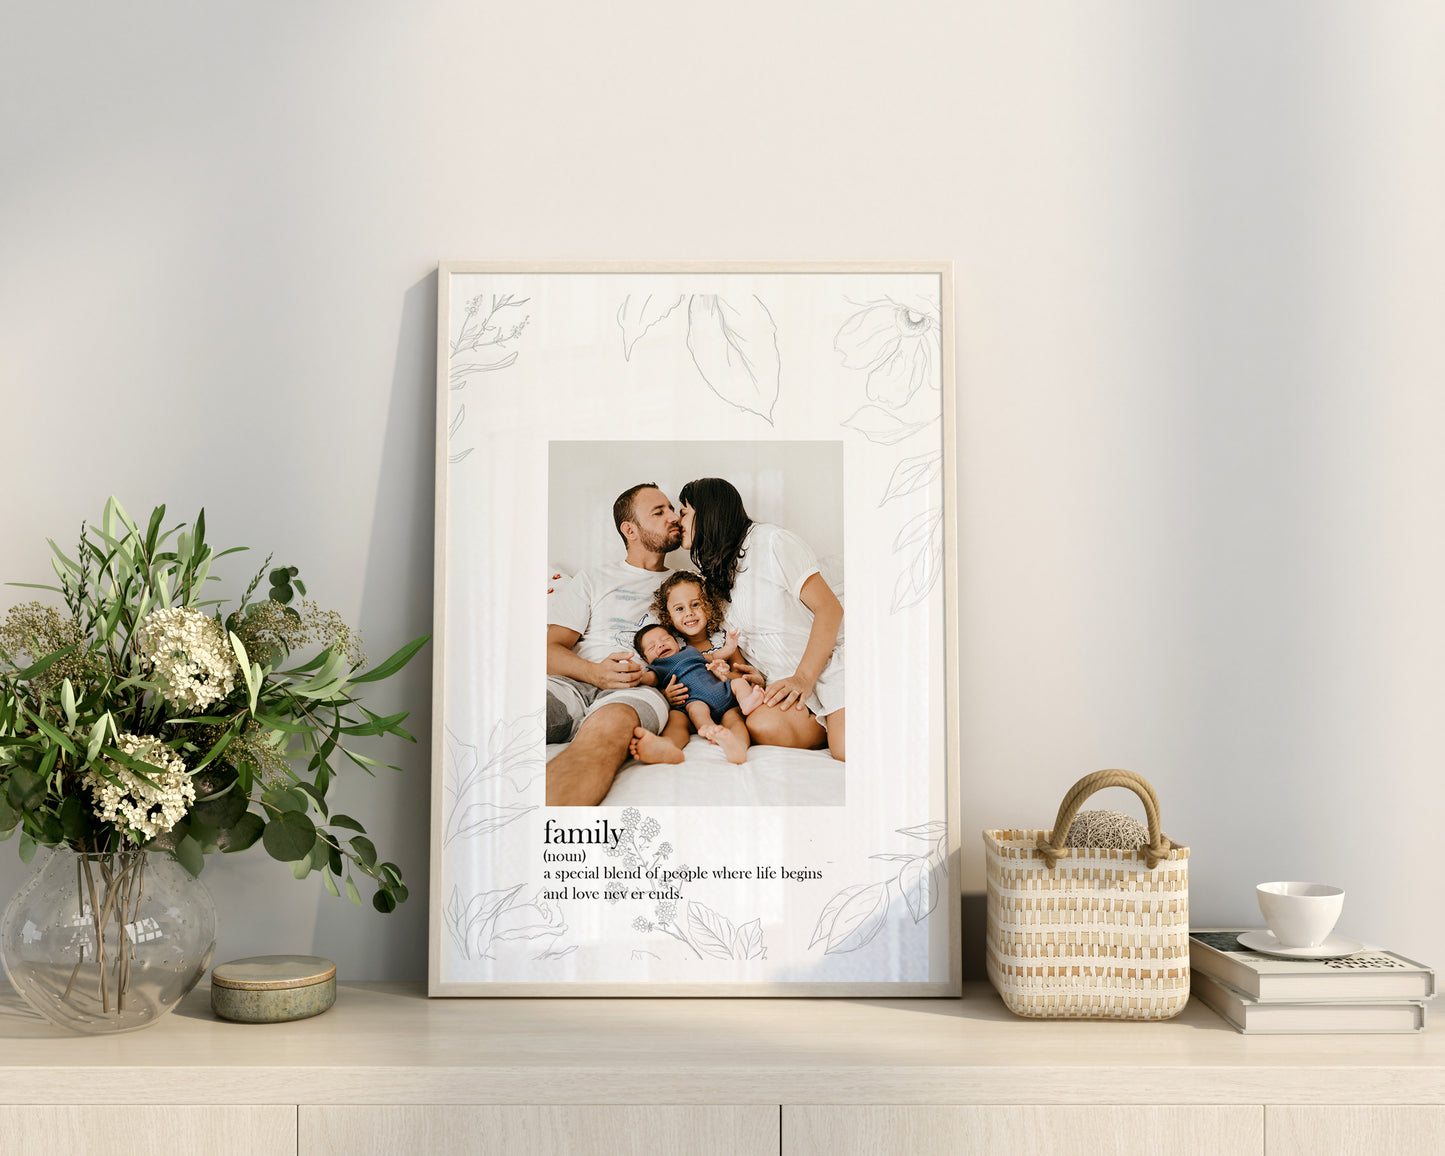 Family Definition 8x10 Photo Mat